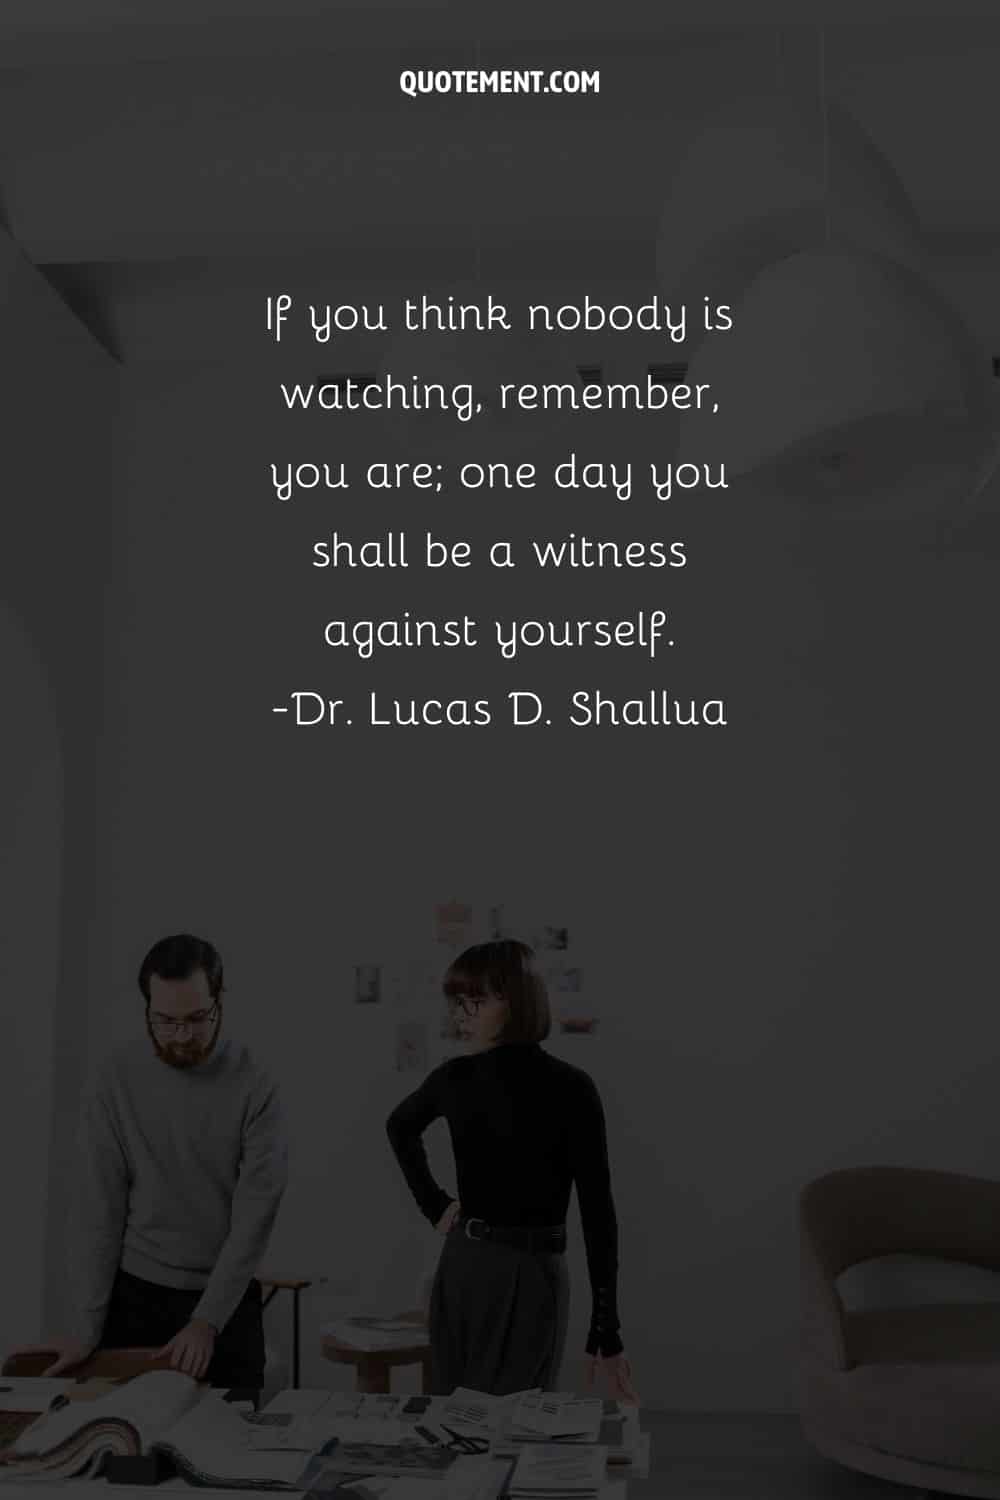 If you think nobody is watching, remember, you are; one day you shall be a witness against yourself